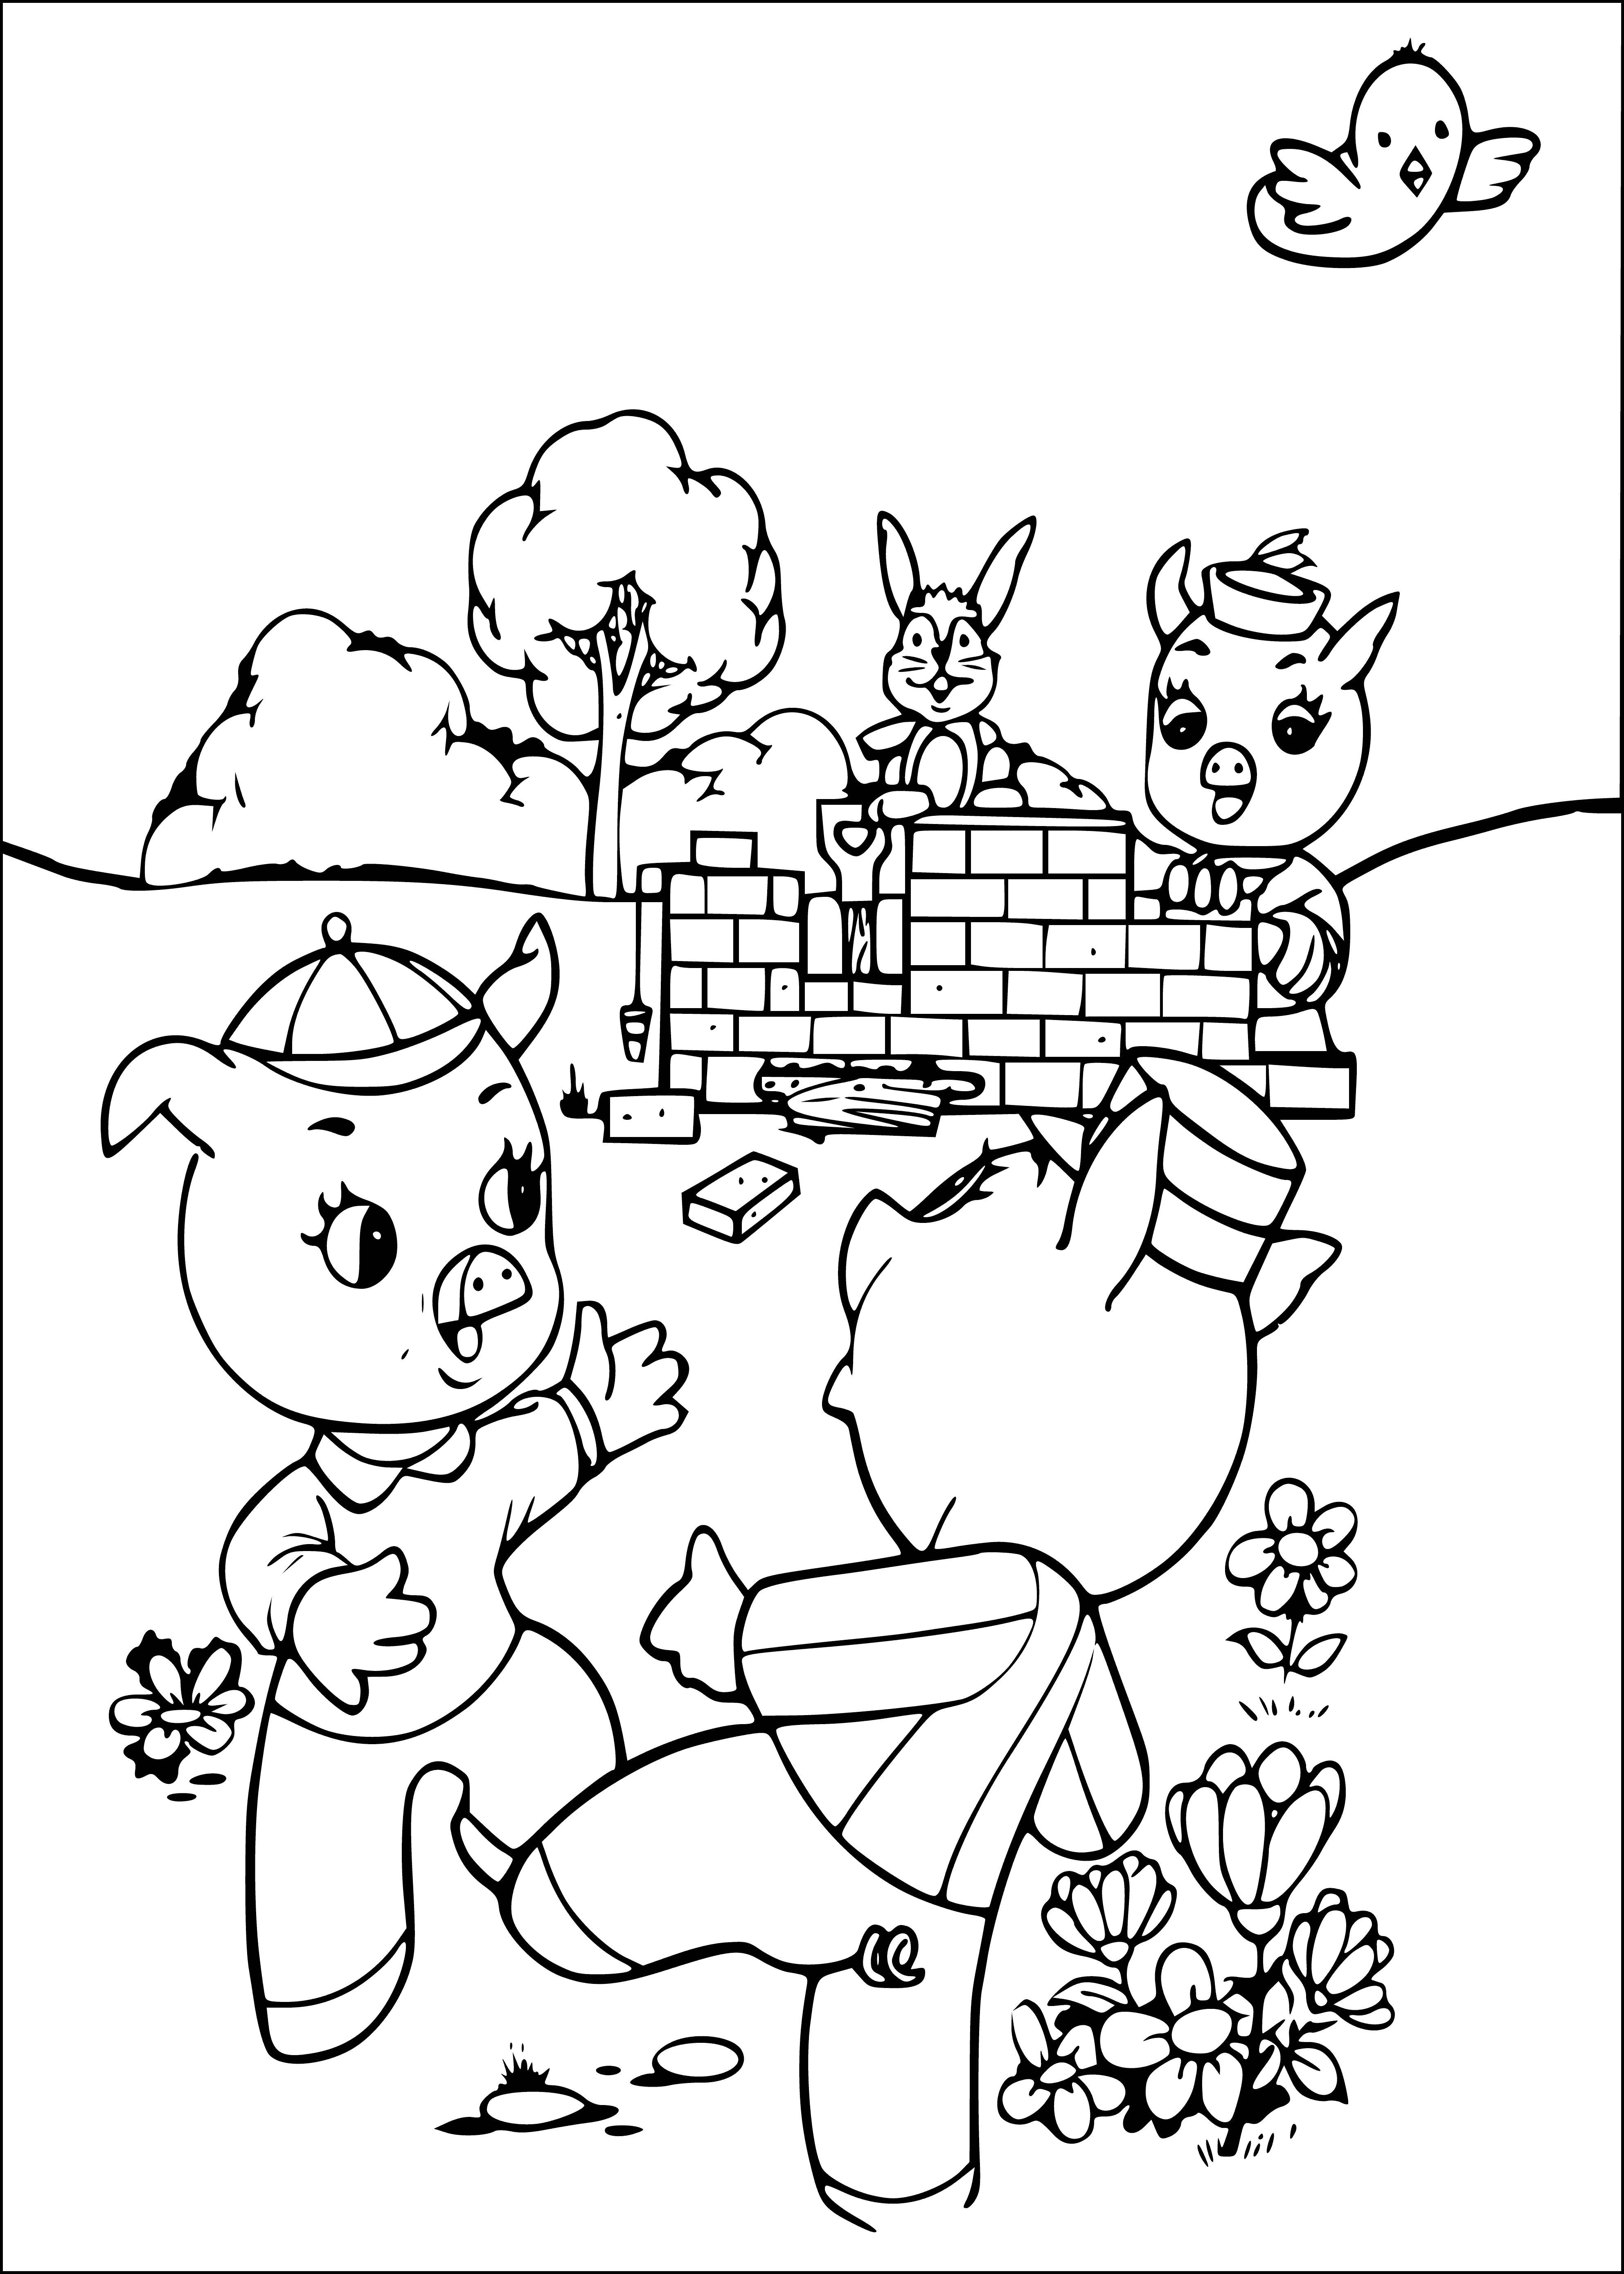 coloring page: Three pigs & a wolf in a coloring page; one of the pigs scared, the other two sitting.